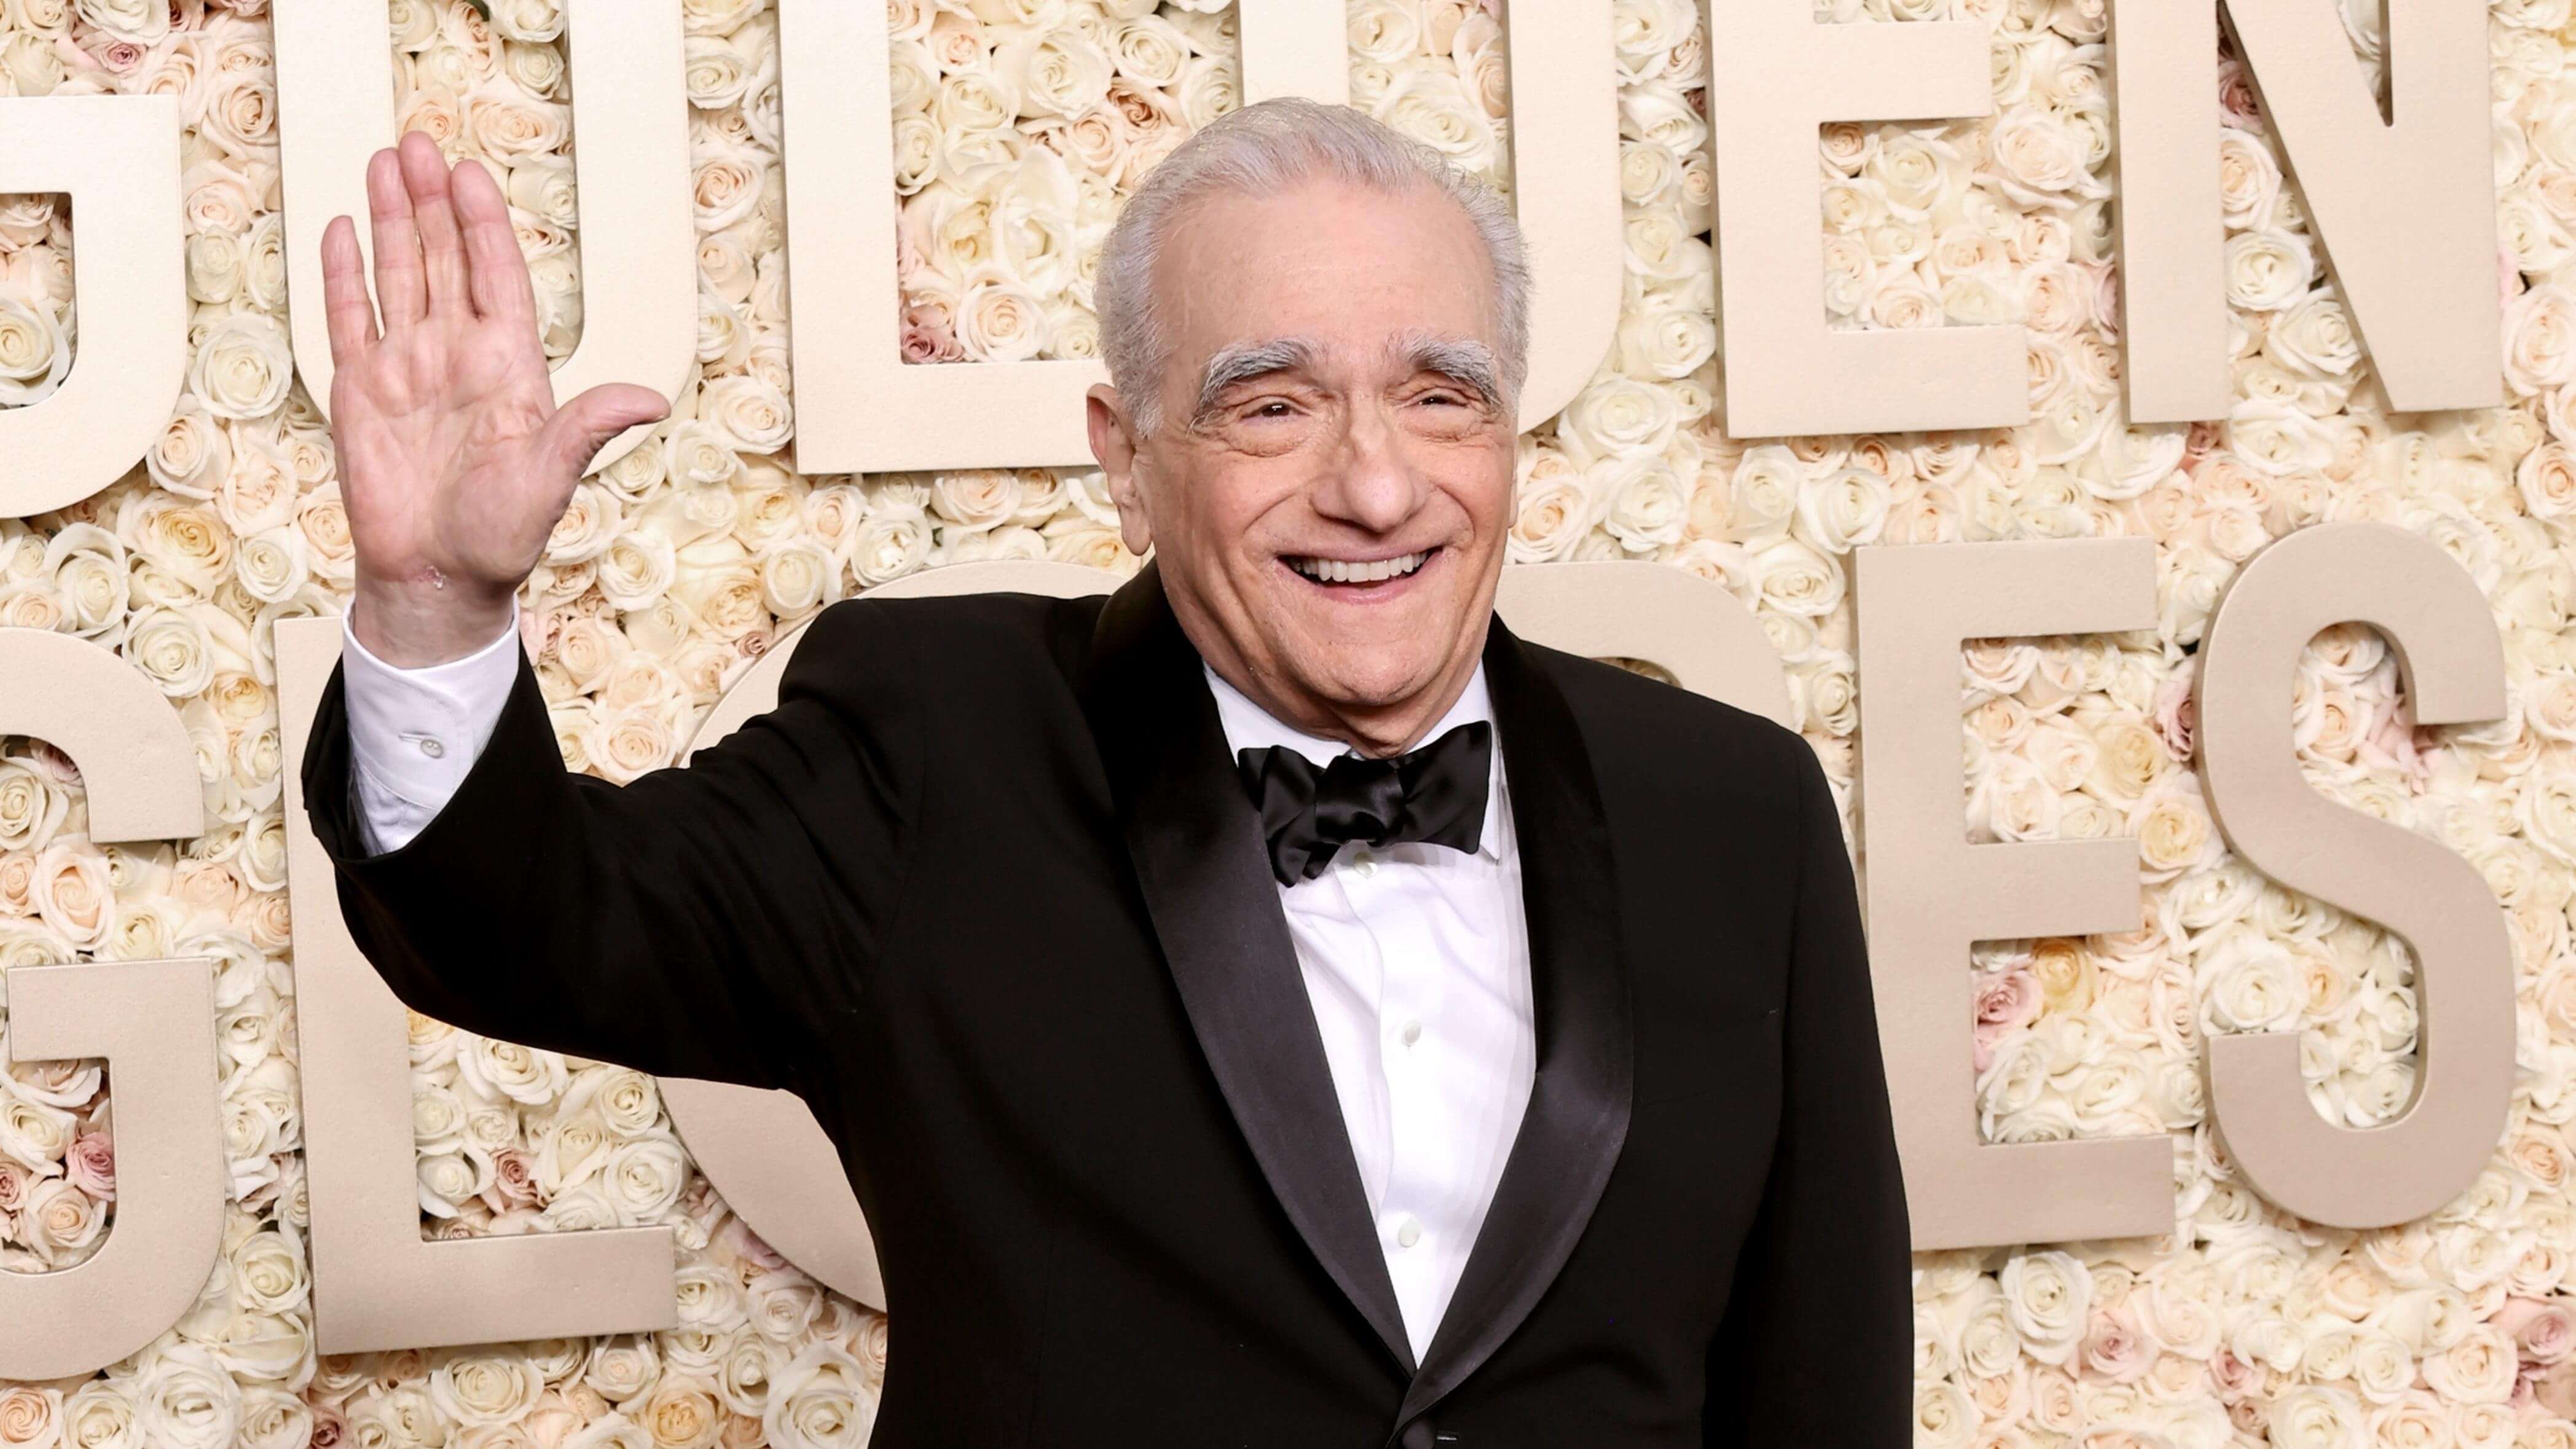 Stand down, runtime police: Martin Scorsese’s next movie is only 80 minutes long